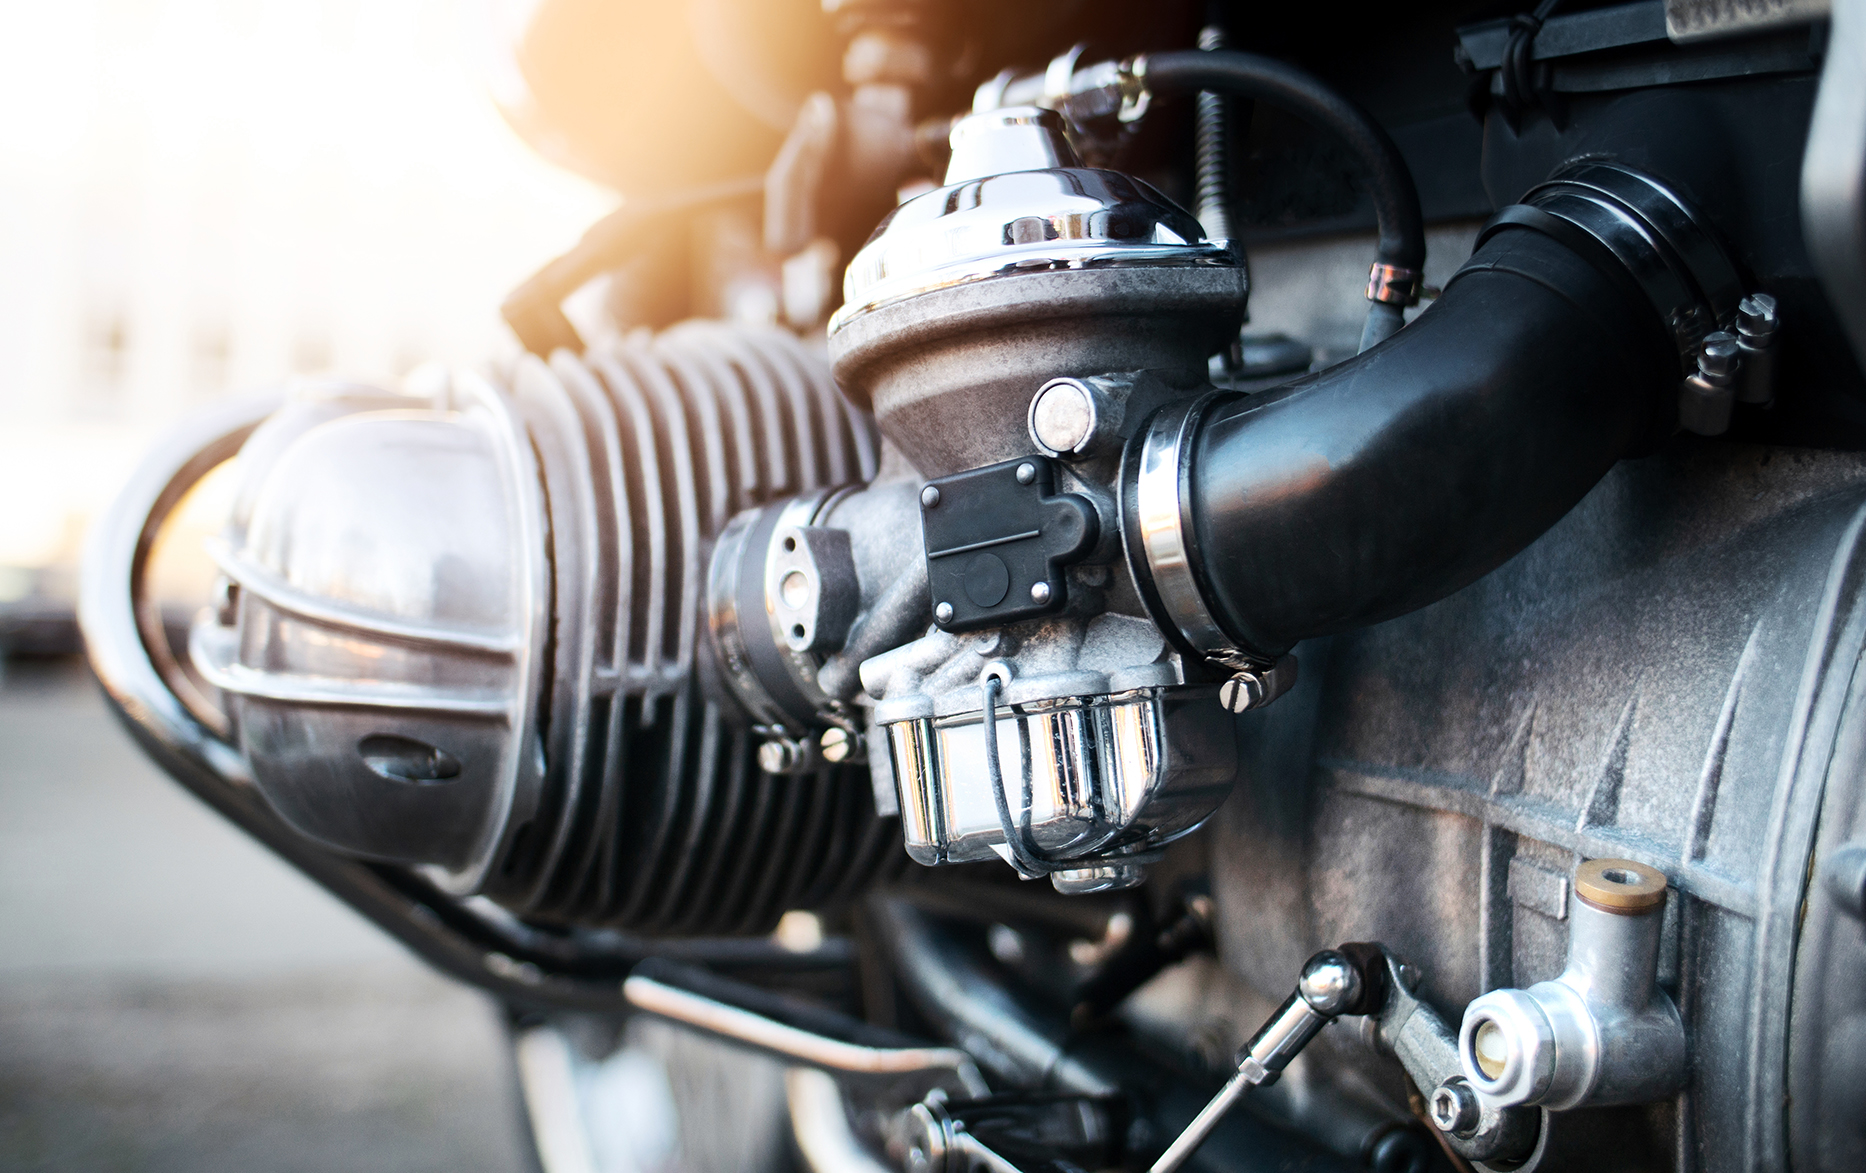 How to Clean a Motorcycle Carburetor